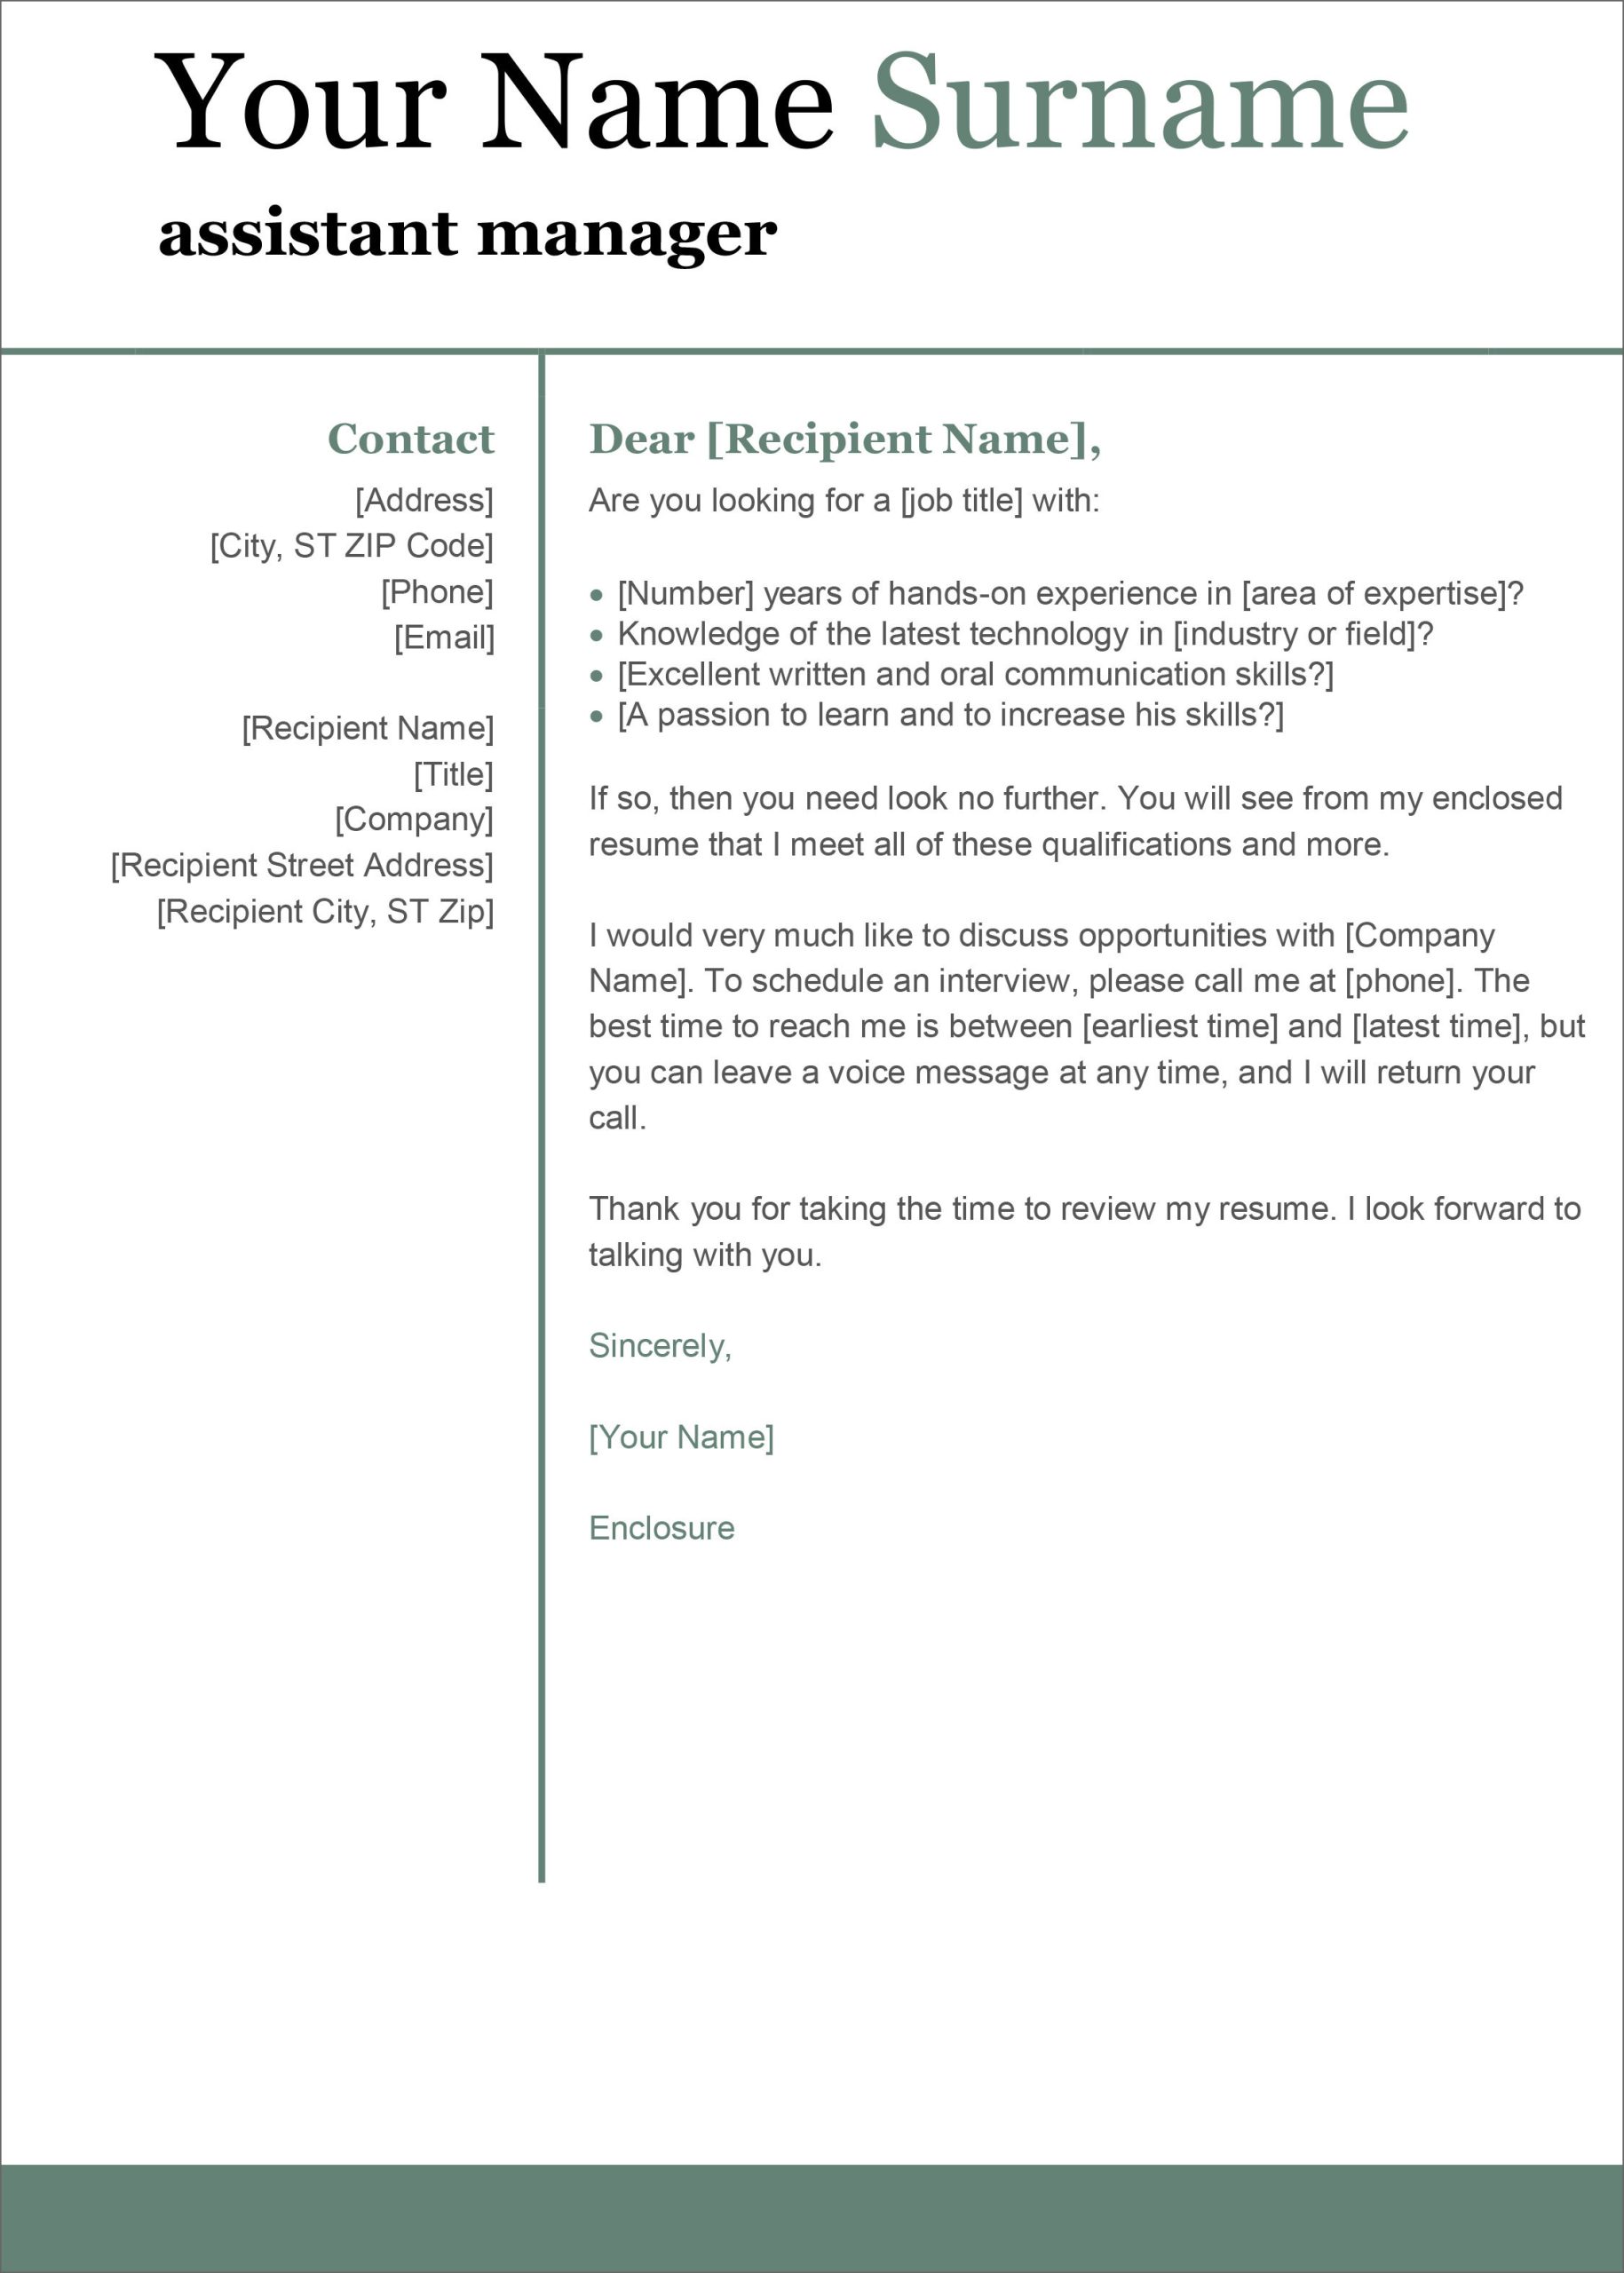 Sample Cover Letter to Accompany Resume 13 Free Cover Letter Templates for Microsoft Word Docx and Google Docs